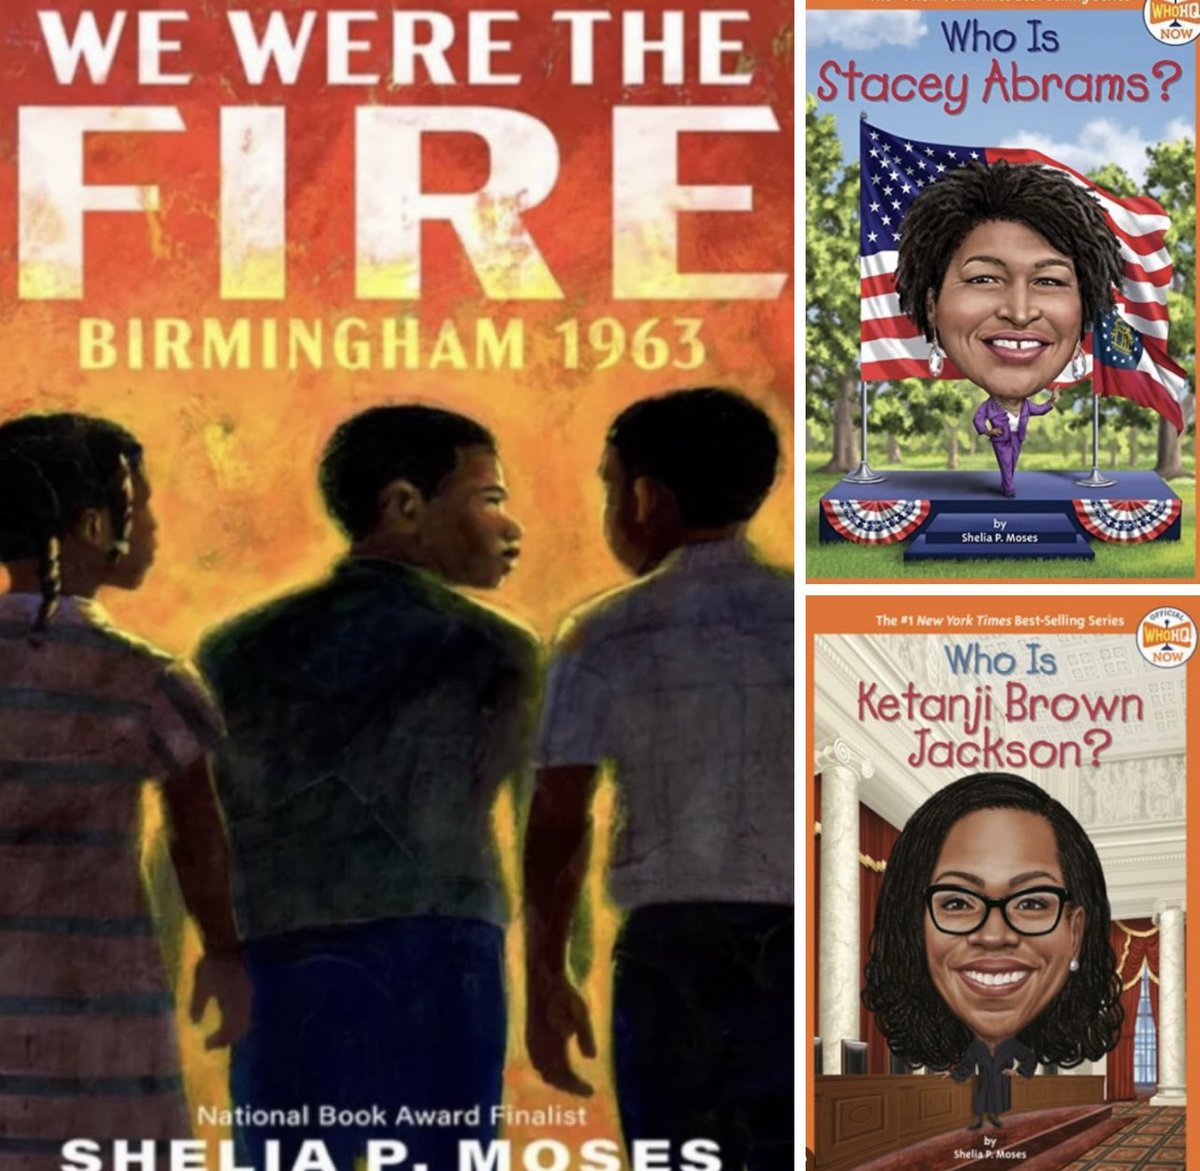 Hey Book Lovers! Don’t forget I will be giving away 3 of my new books at noon today and the little library starter kit tomorrow. Follow me on this page and Reply-FOLLOWING to enter the drawing.#wewerethefire #whoistketanjibrownjackson #whoisstaceyabrams